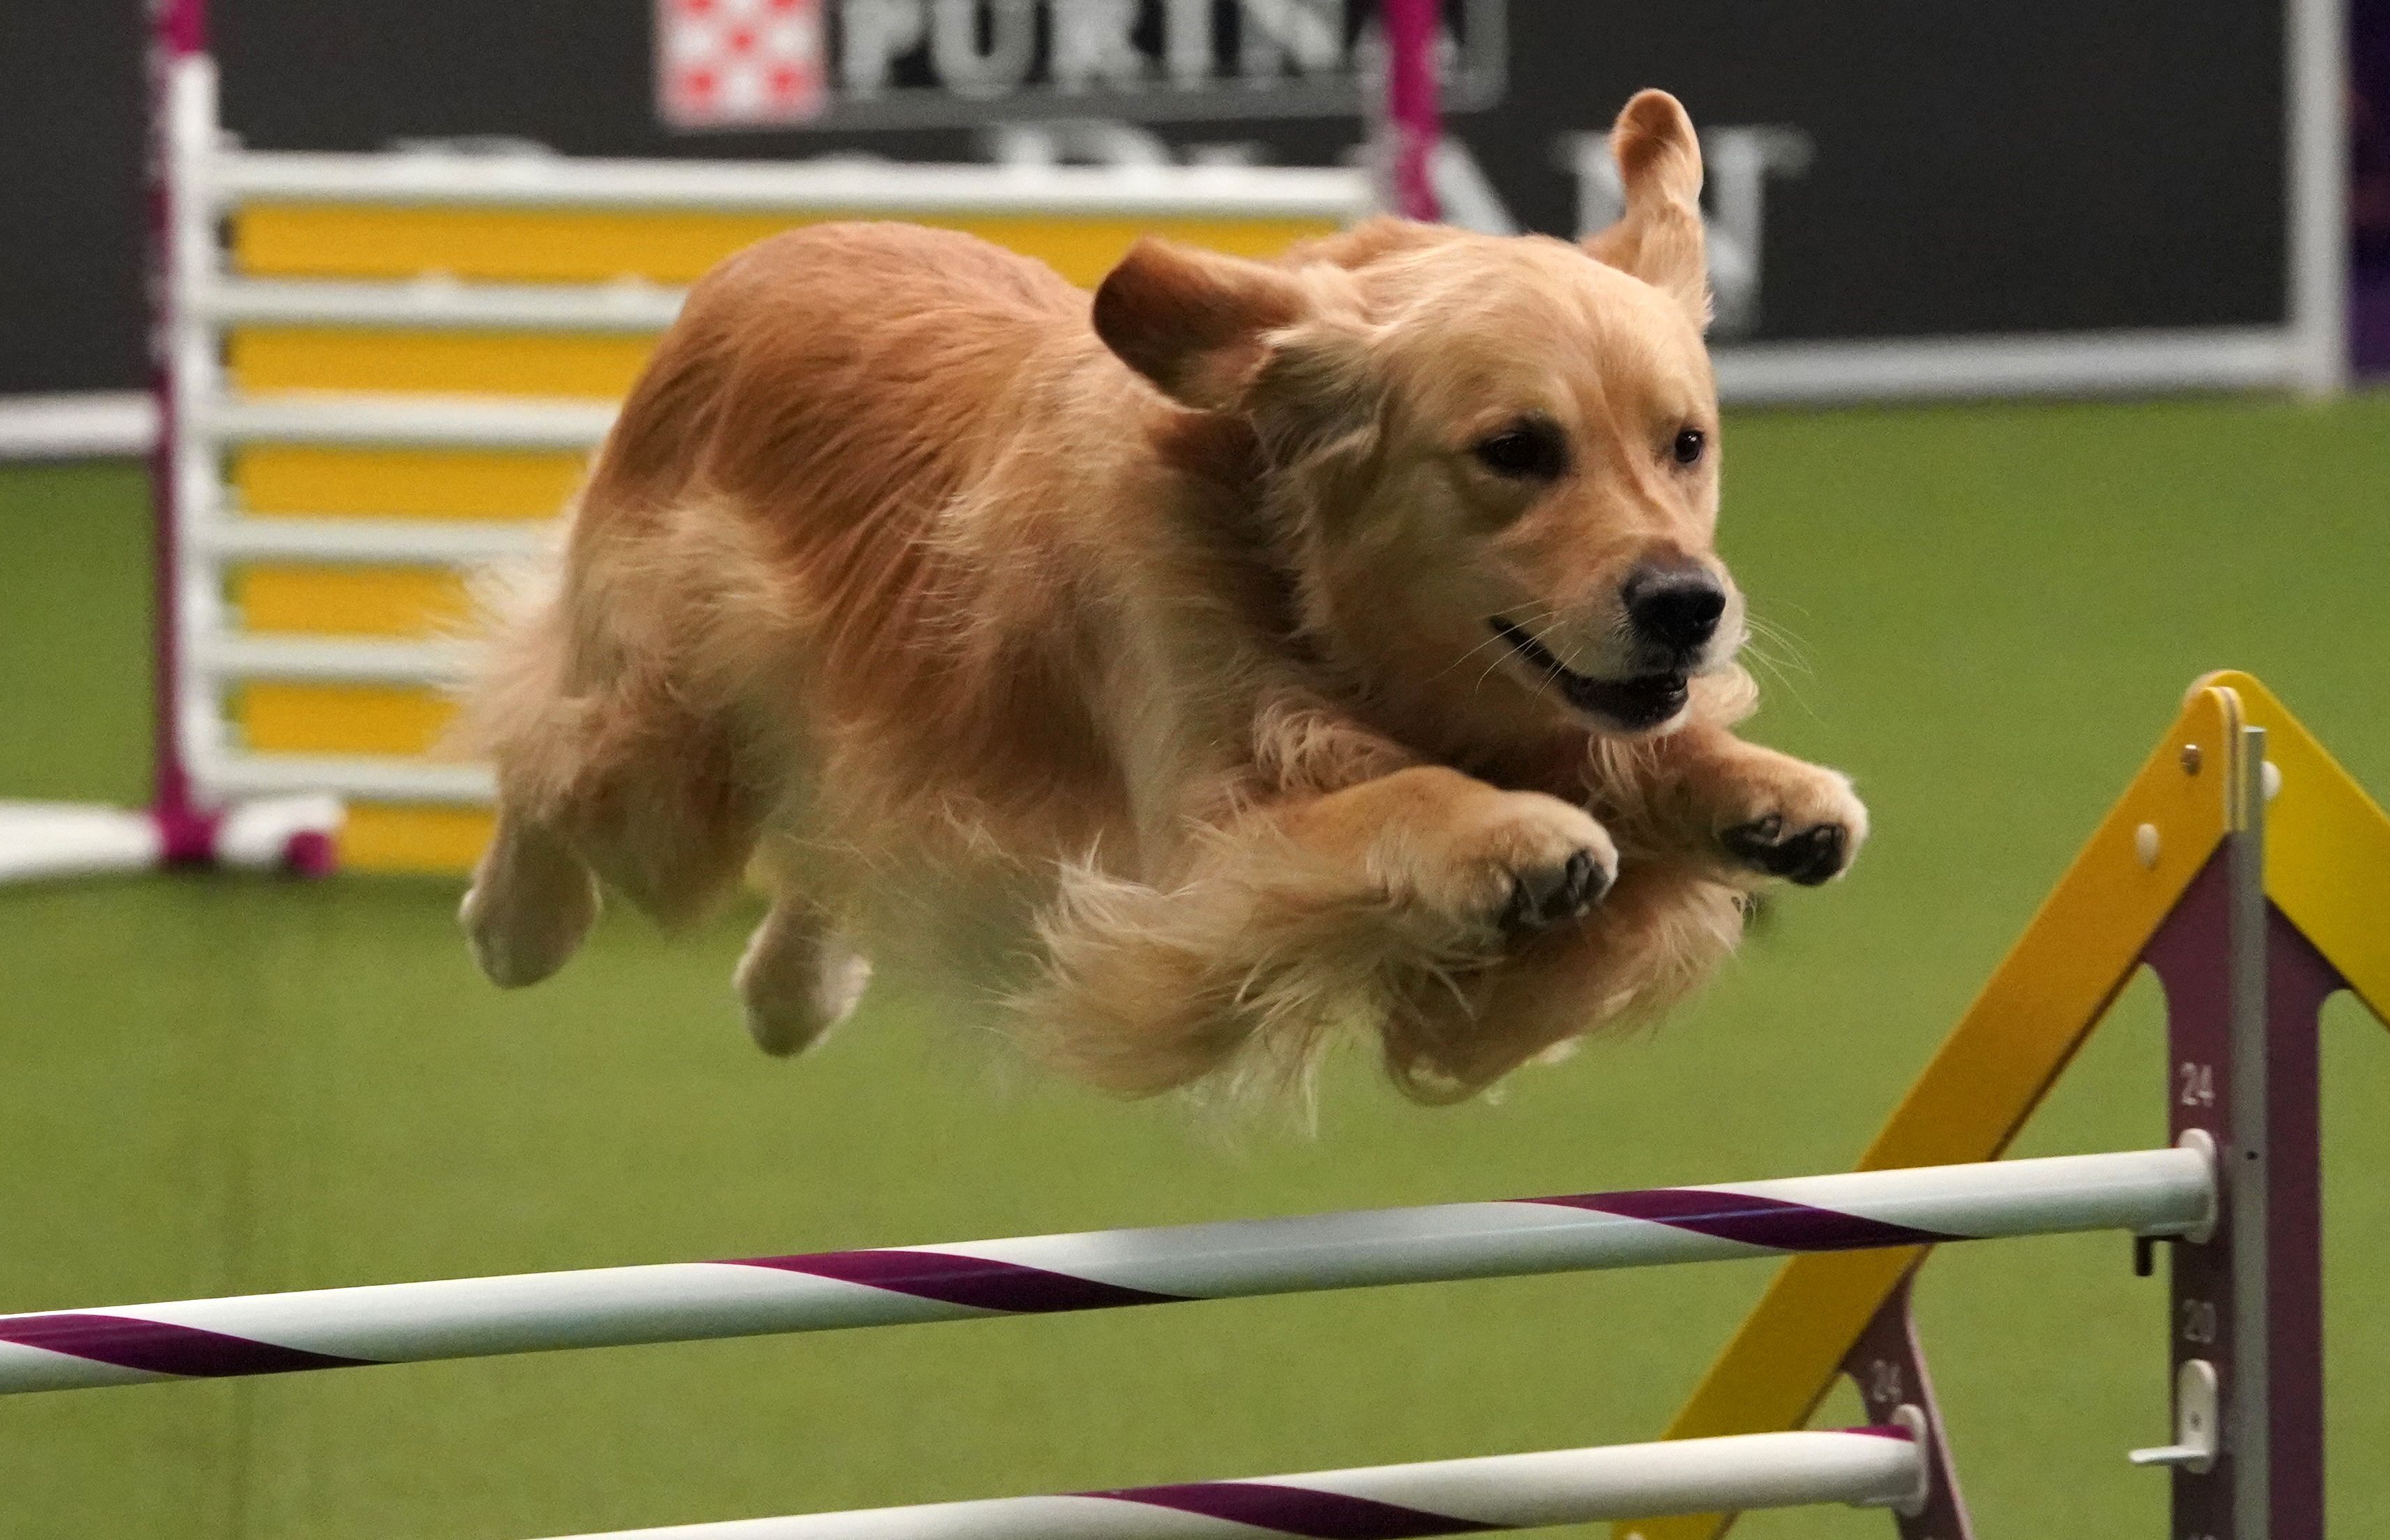 How To Watch The Westminster Kennel Club Dog Show 2021